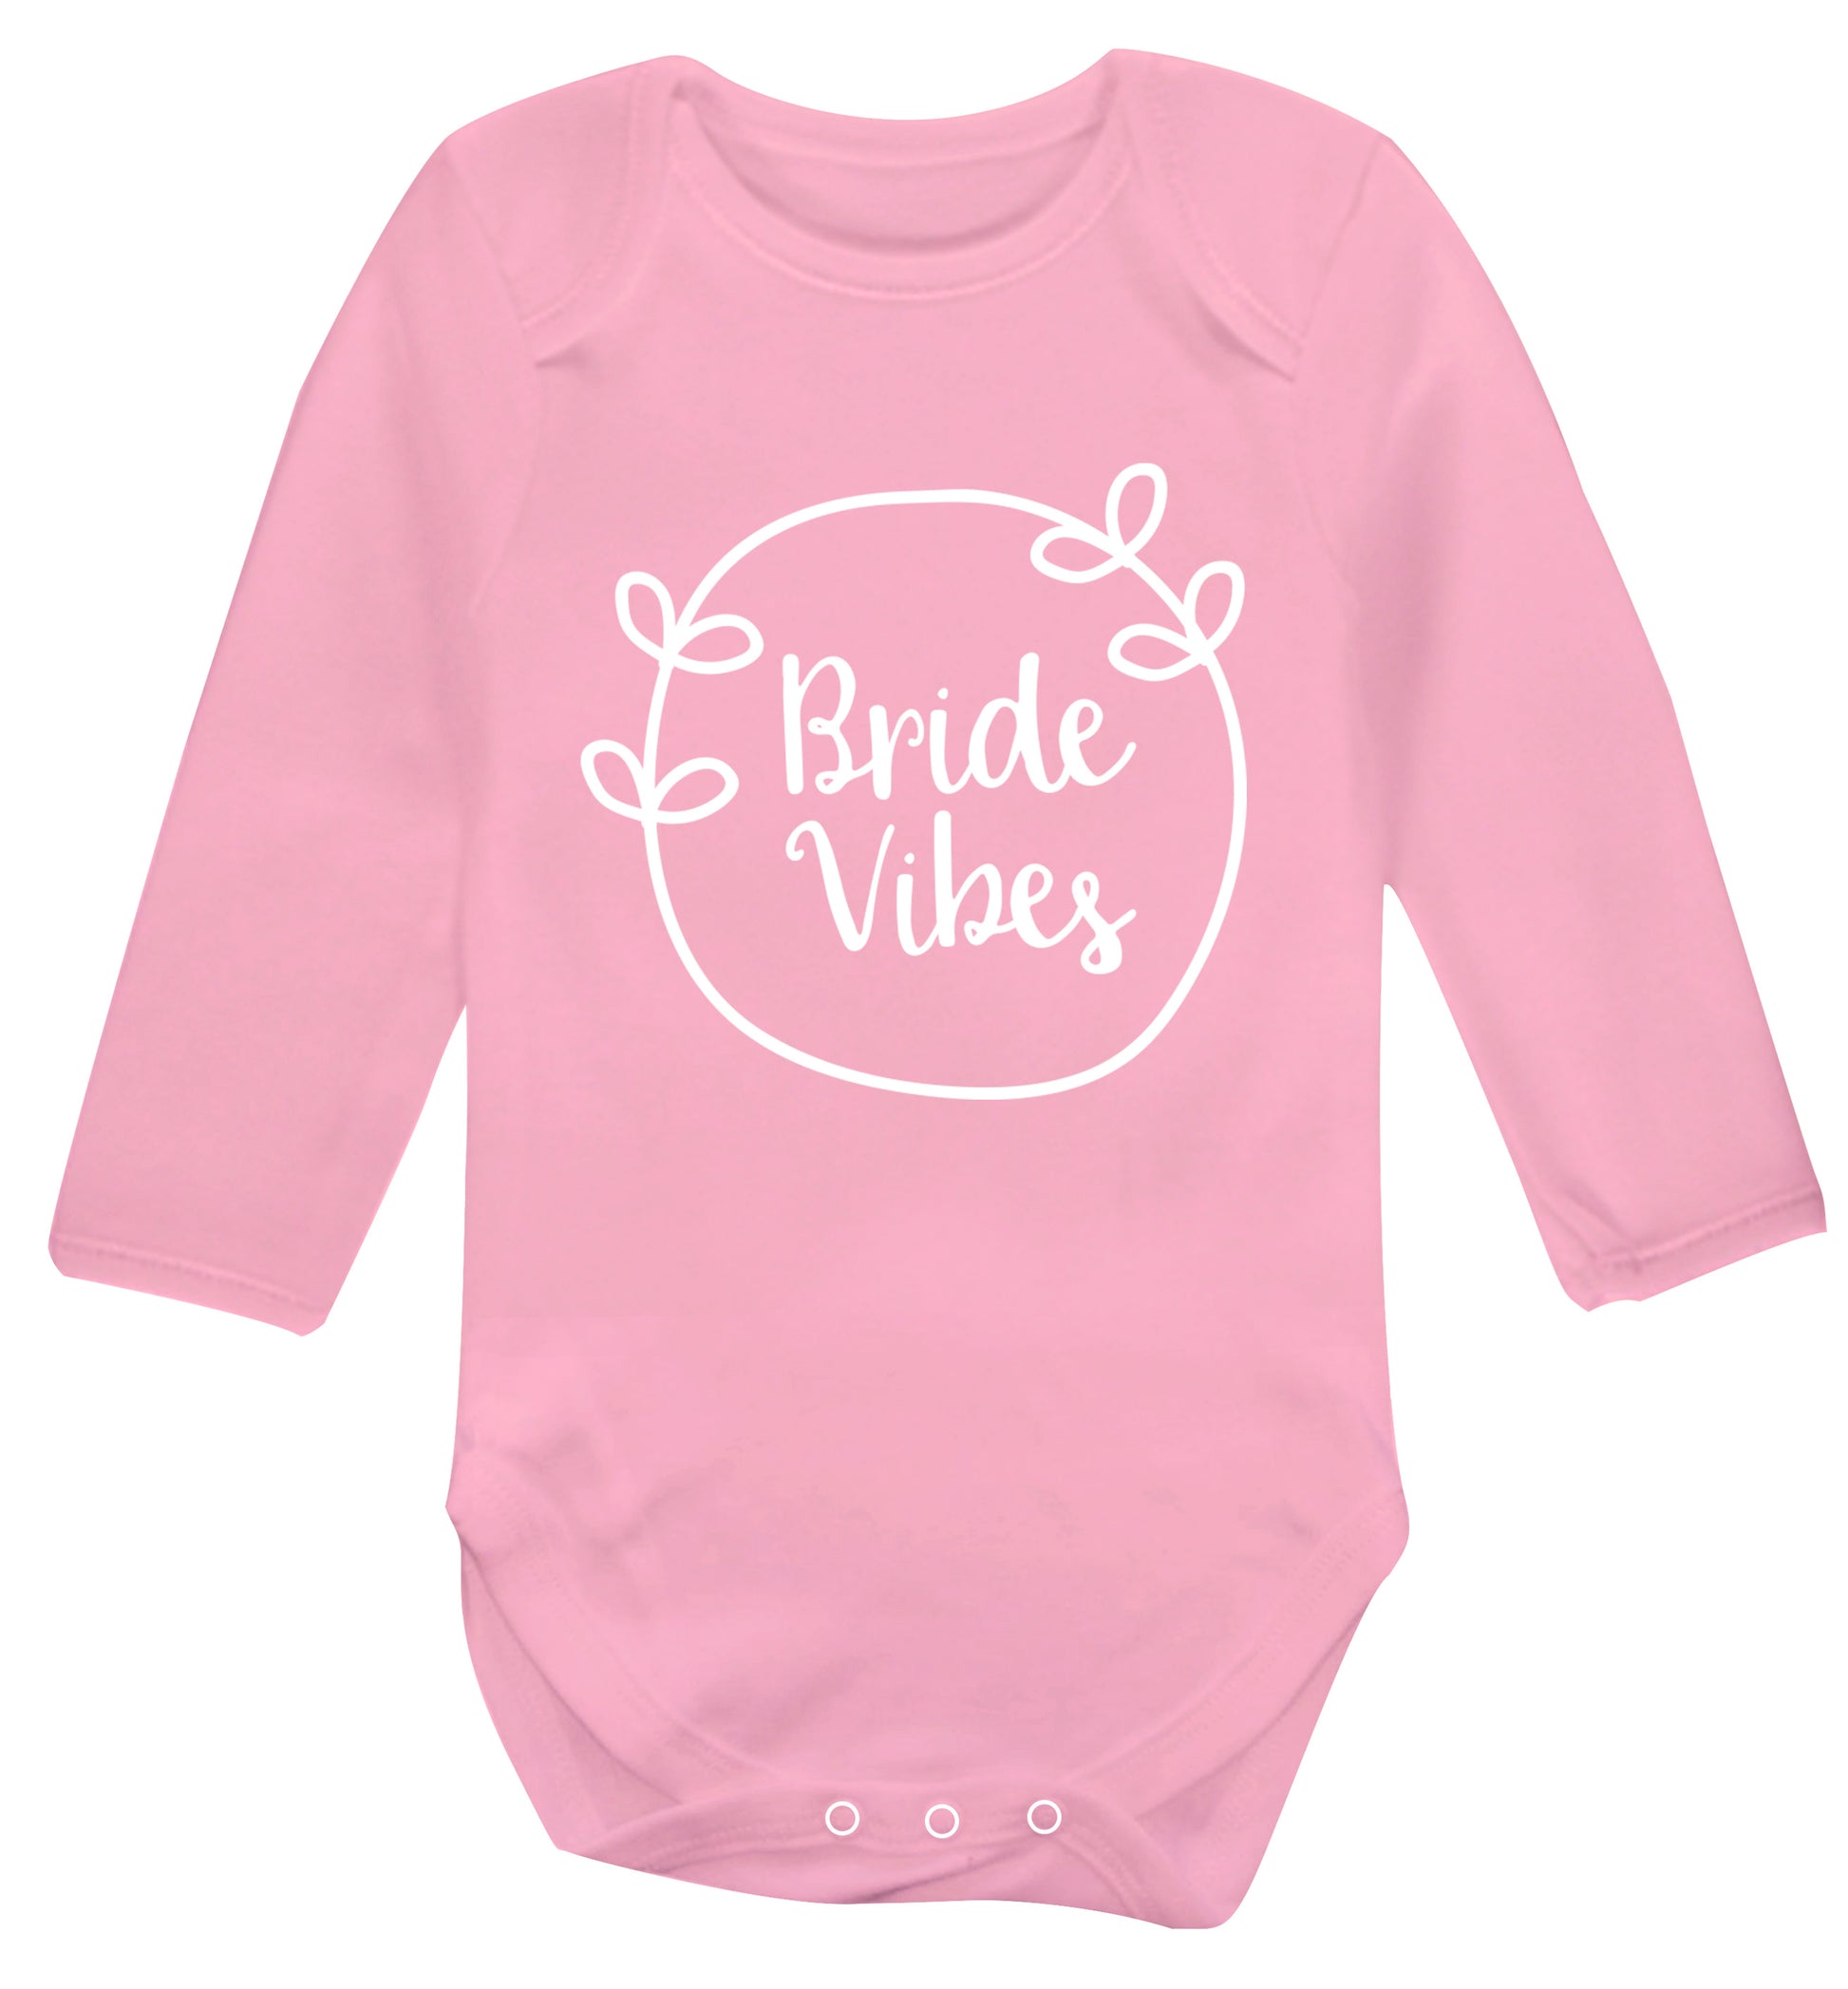 Bride Vibes Baby Vest long sleeved pale pink 6-12 months